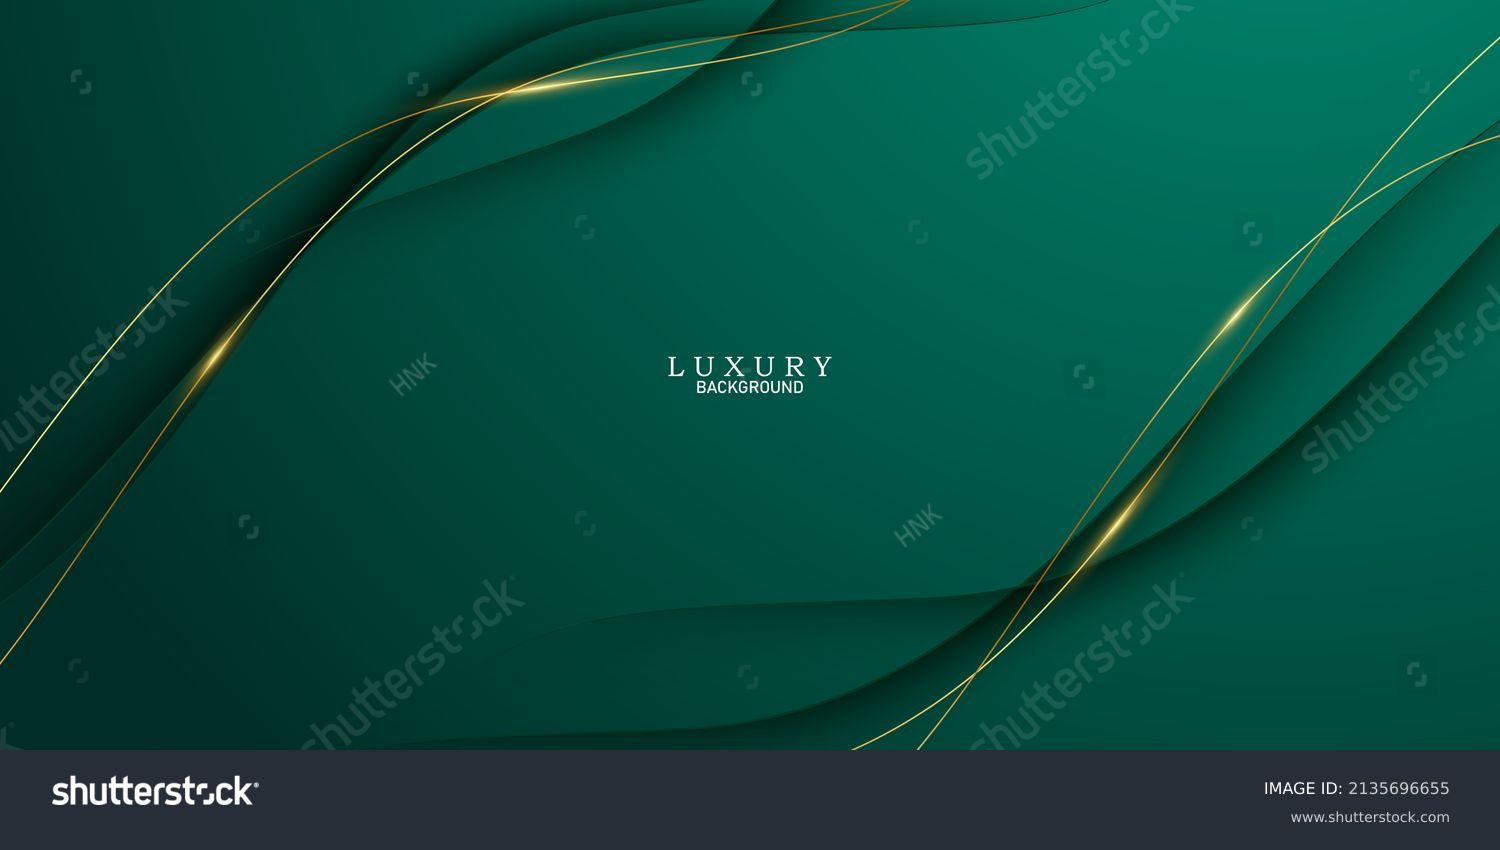 green abstract background decorated with luxury golden lines vector illustration #2135696655